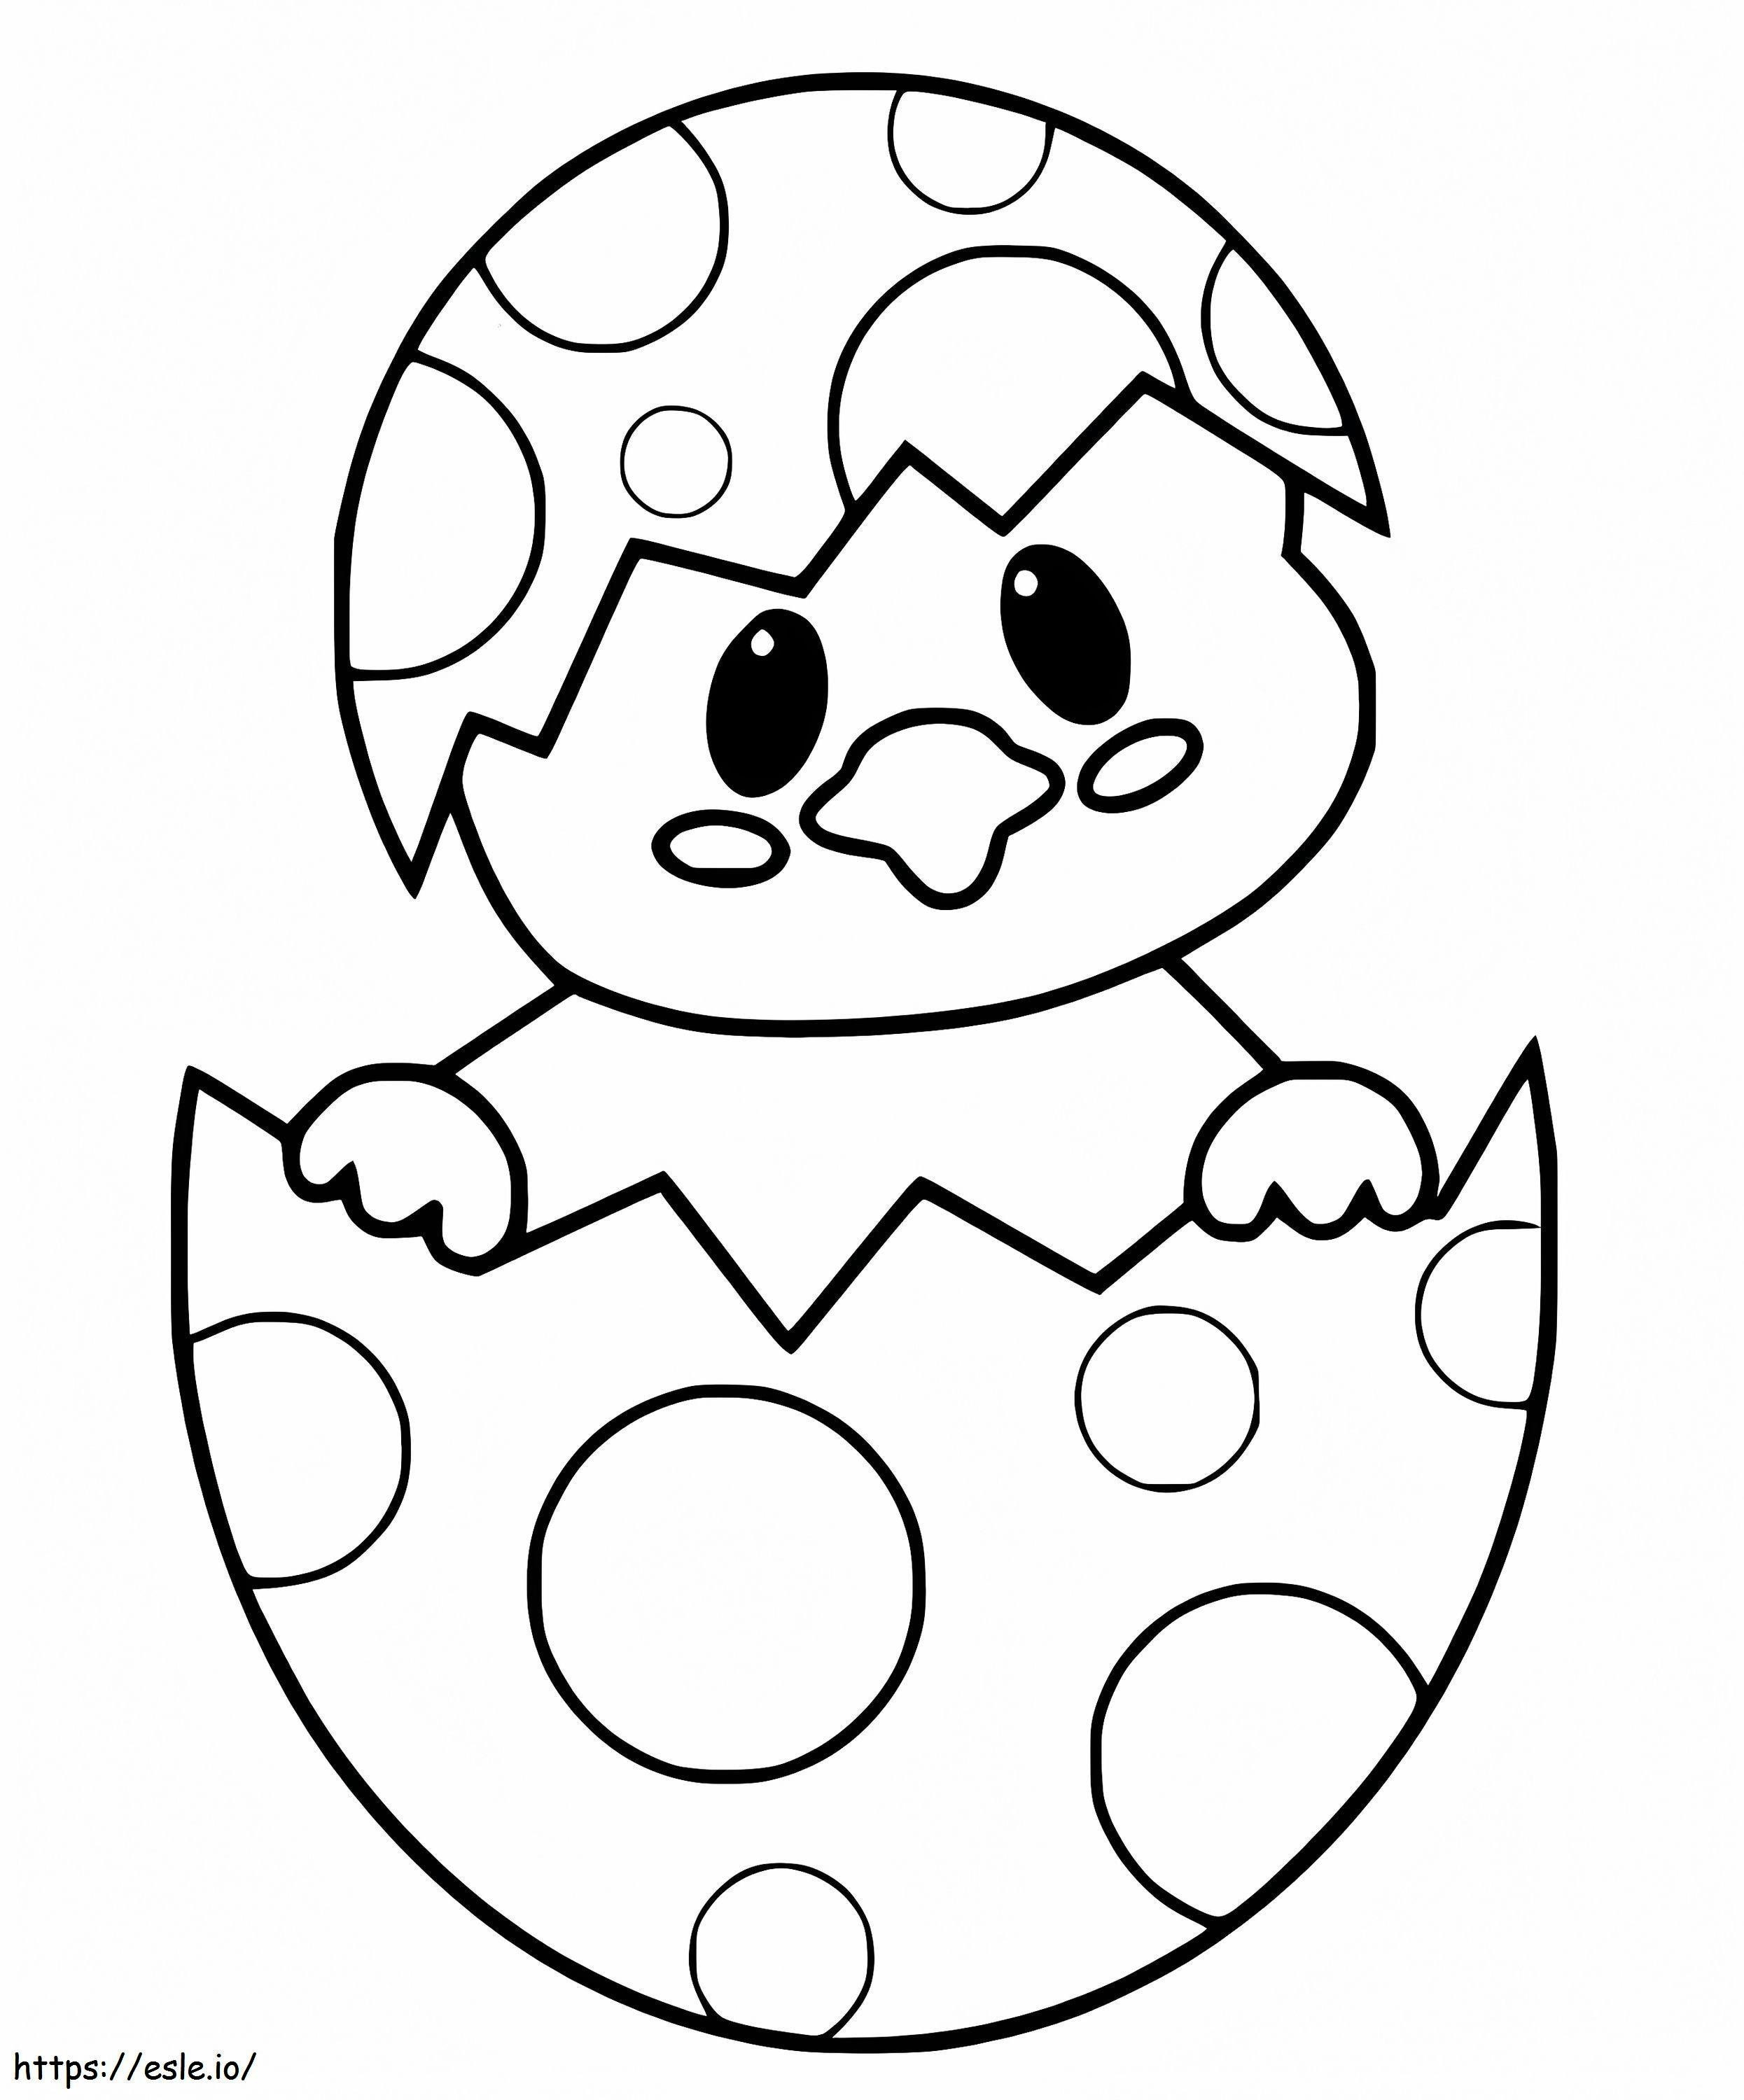 Kawaii Easter Chick coloring page